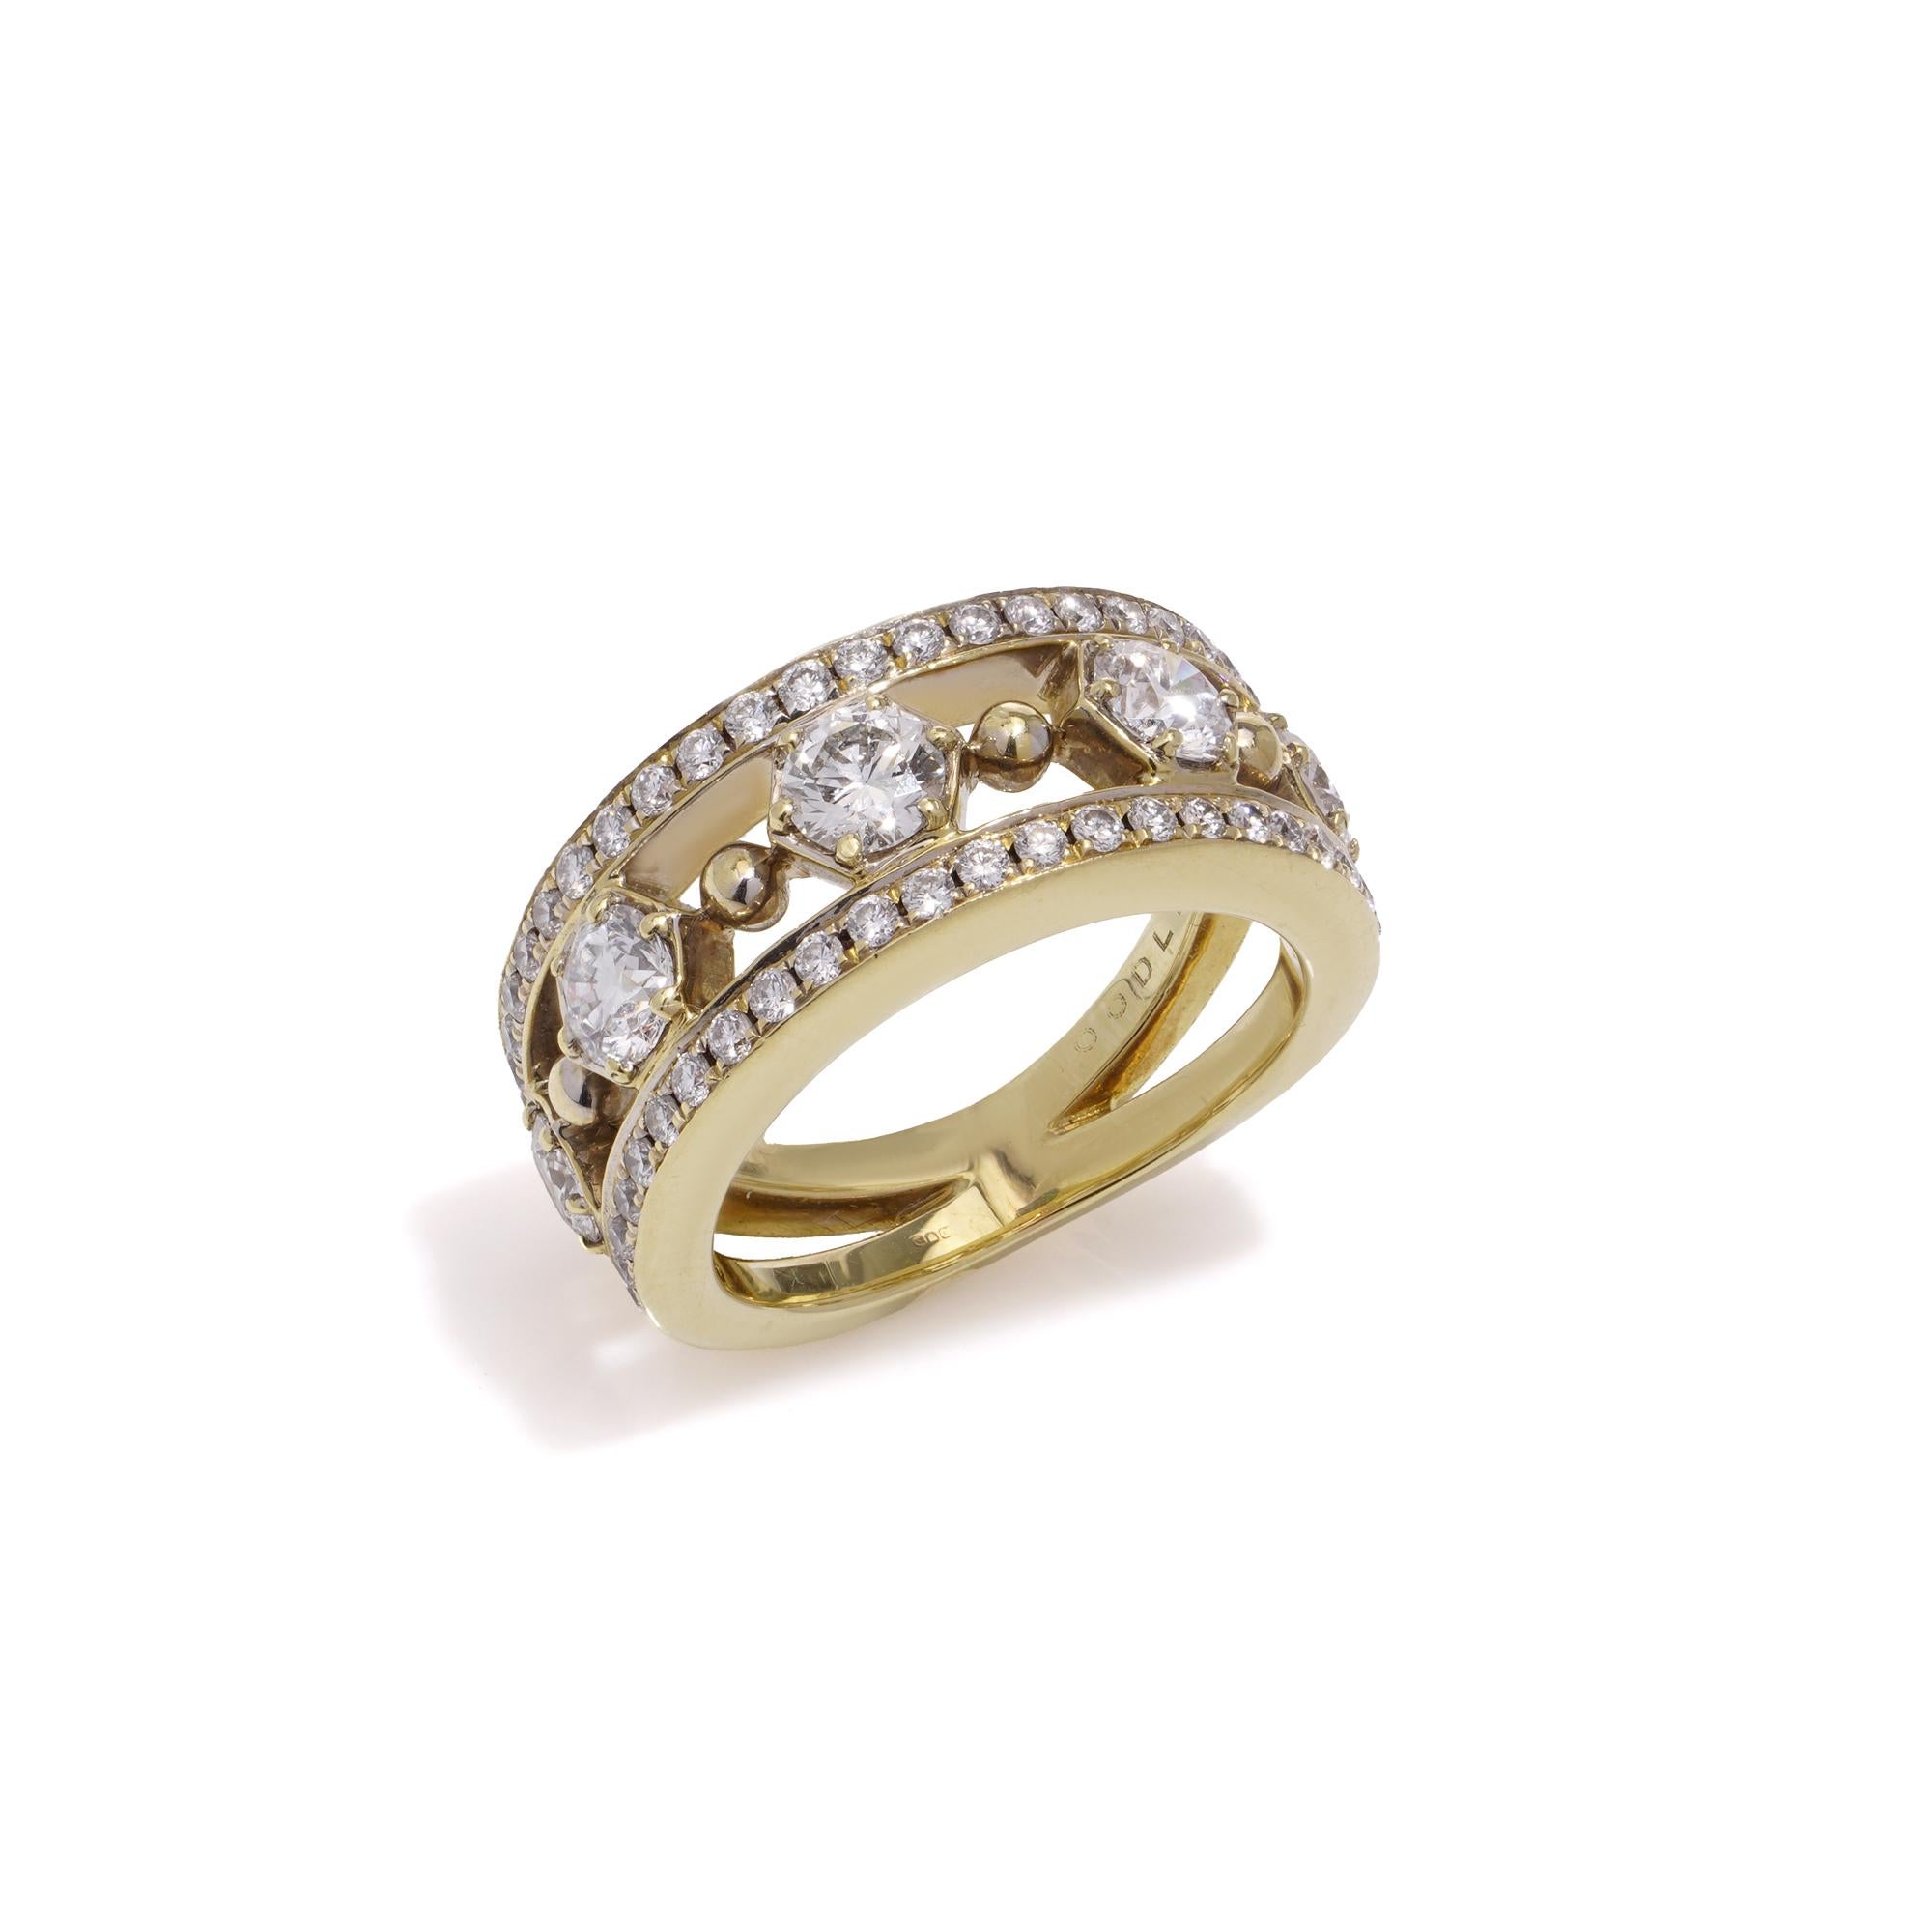 Boodles & Dunthorne 18kt. gold band ring with 1.46 cts of diamonds For Sale 4